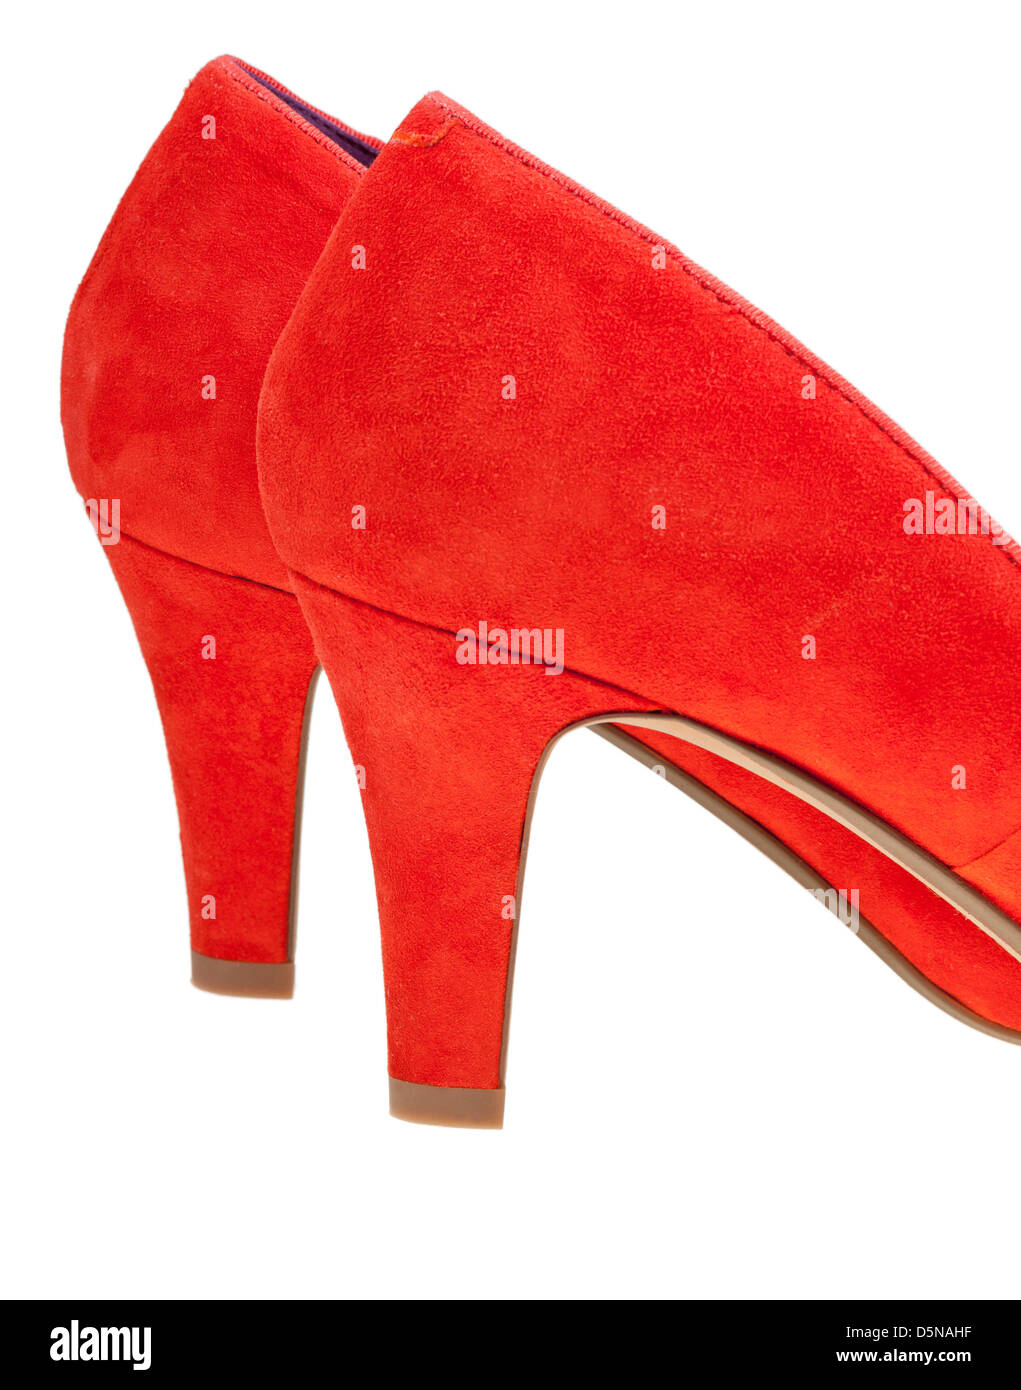 heelpieces of red high heel pump shoes isolated on white background Stock Photo